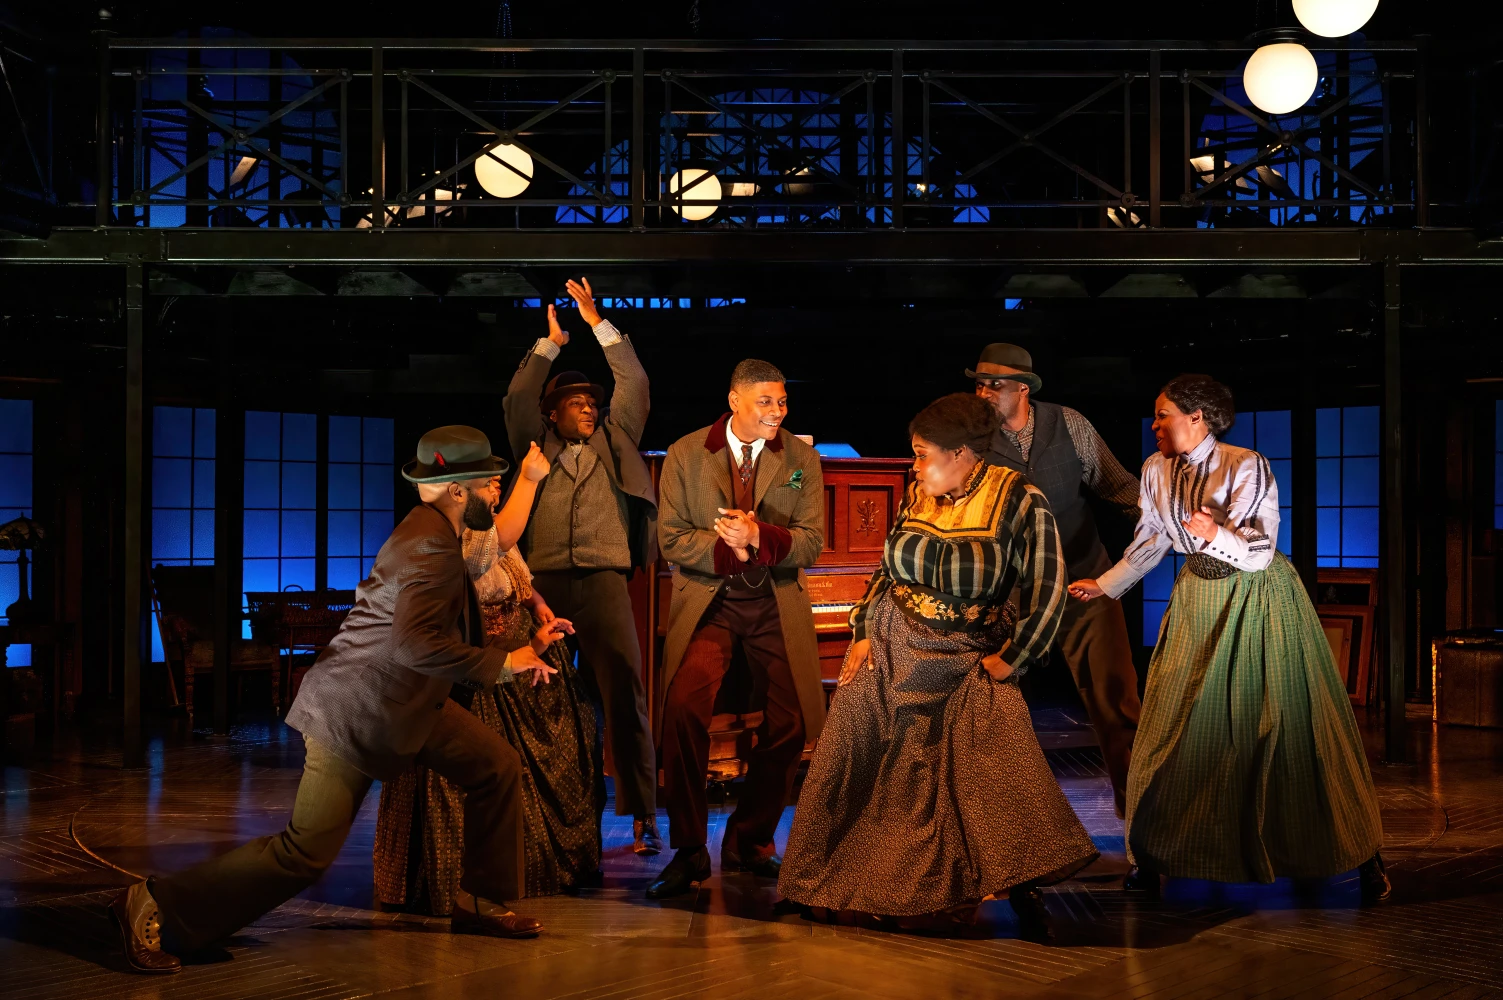 Ragtime: What to expect - 4